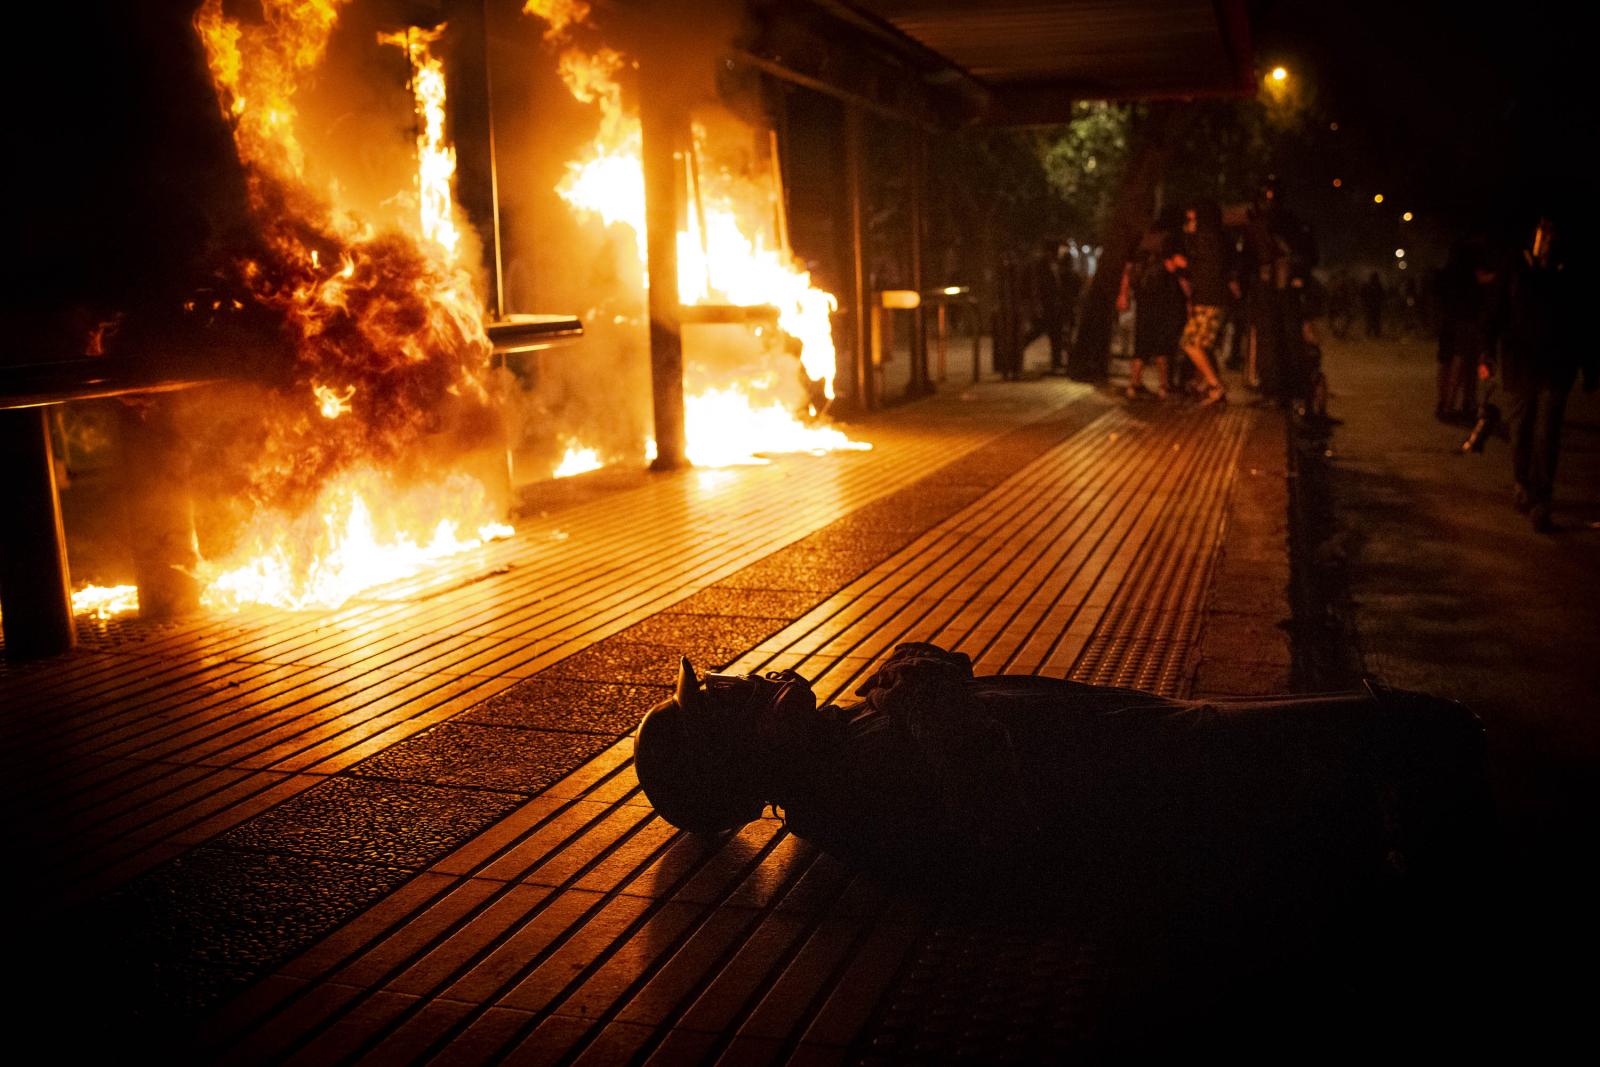 Image from CHILE: From politics to social unrest.